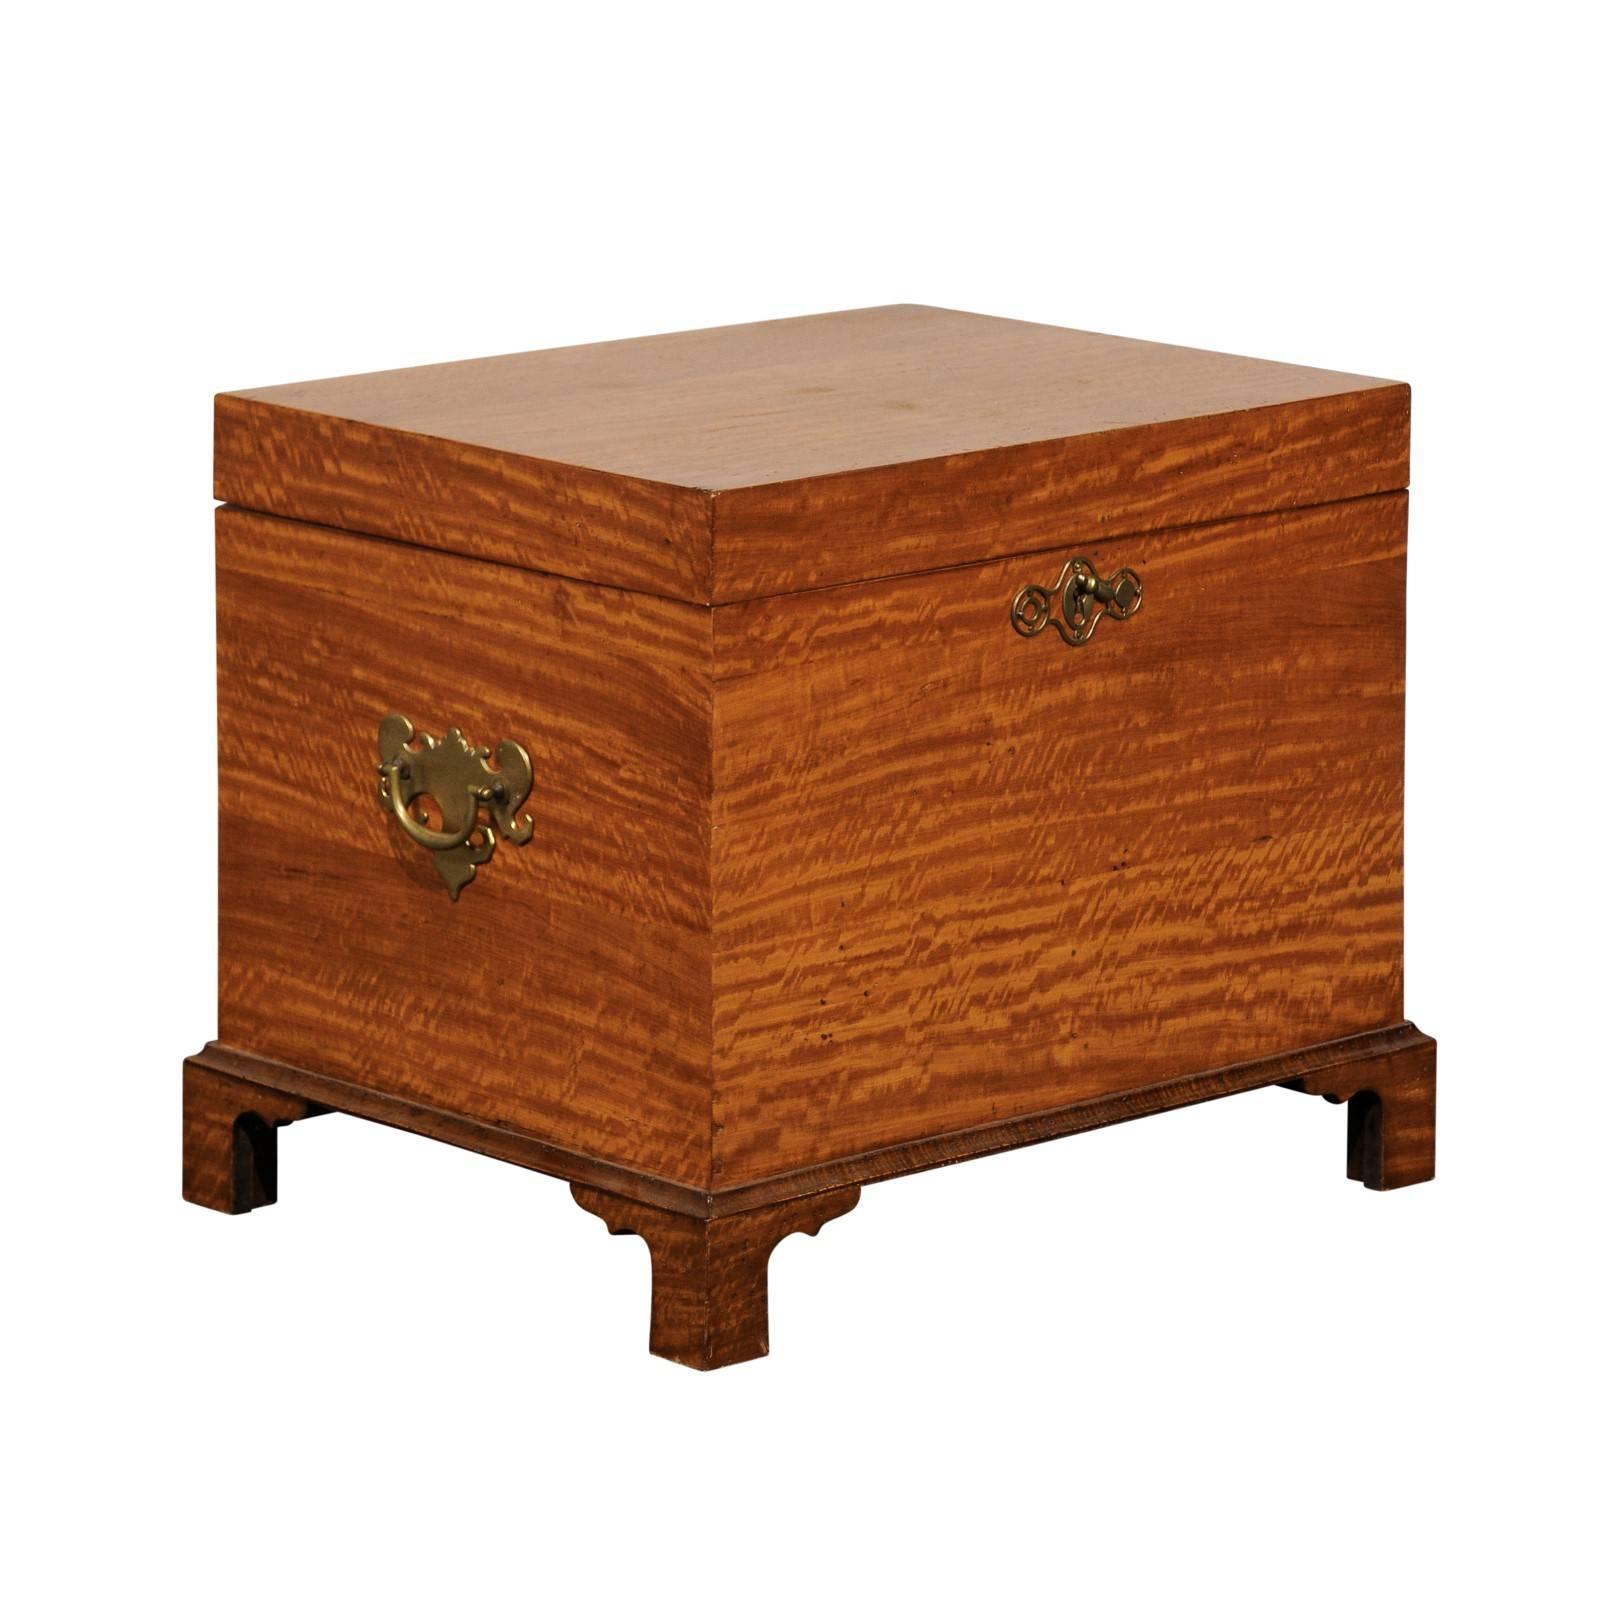 Early 19th Century American Satinwood Cellarette For Sale